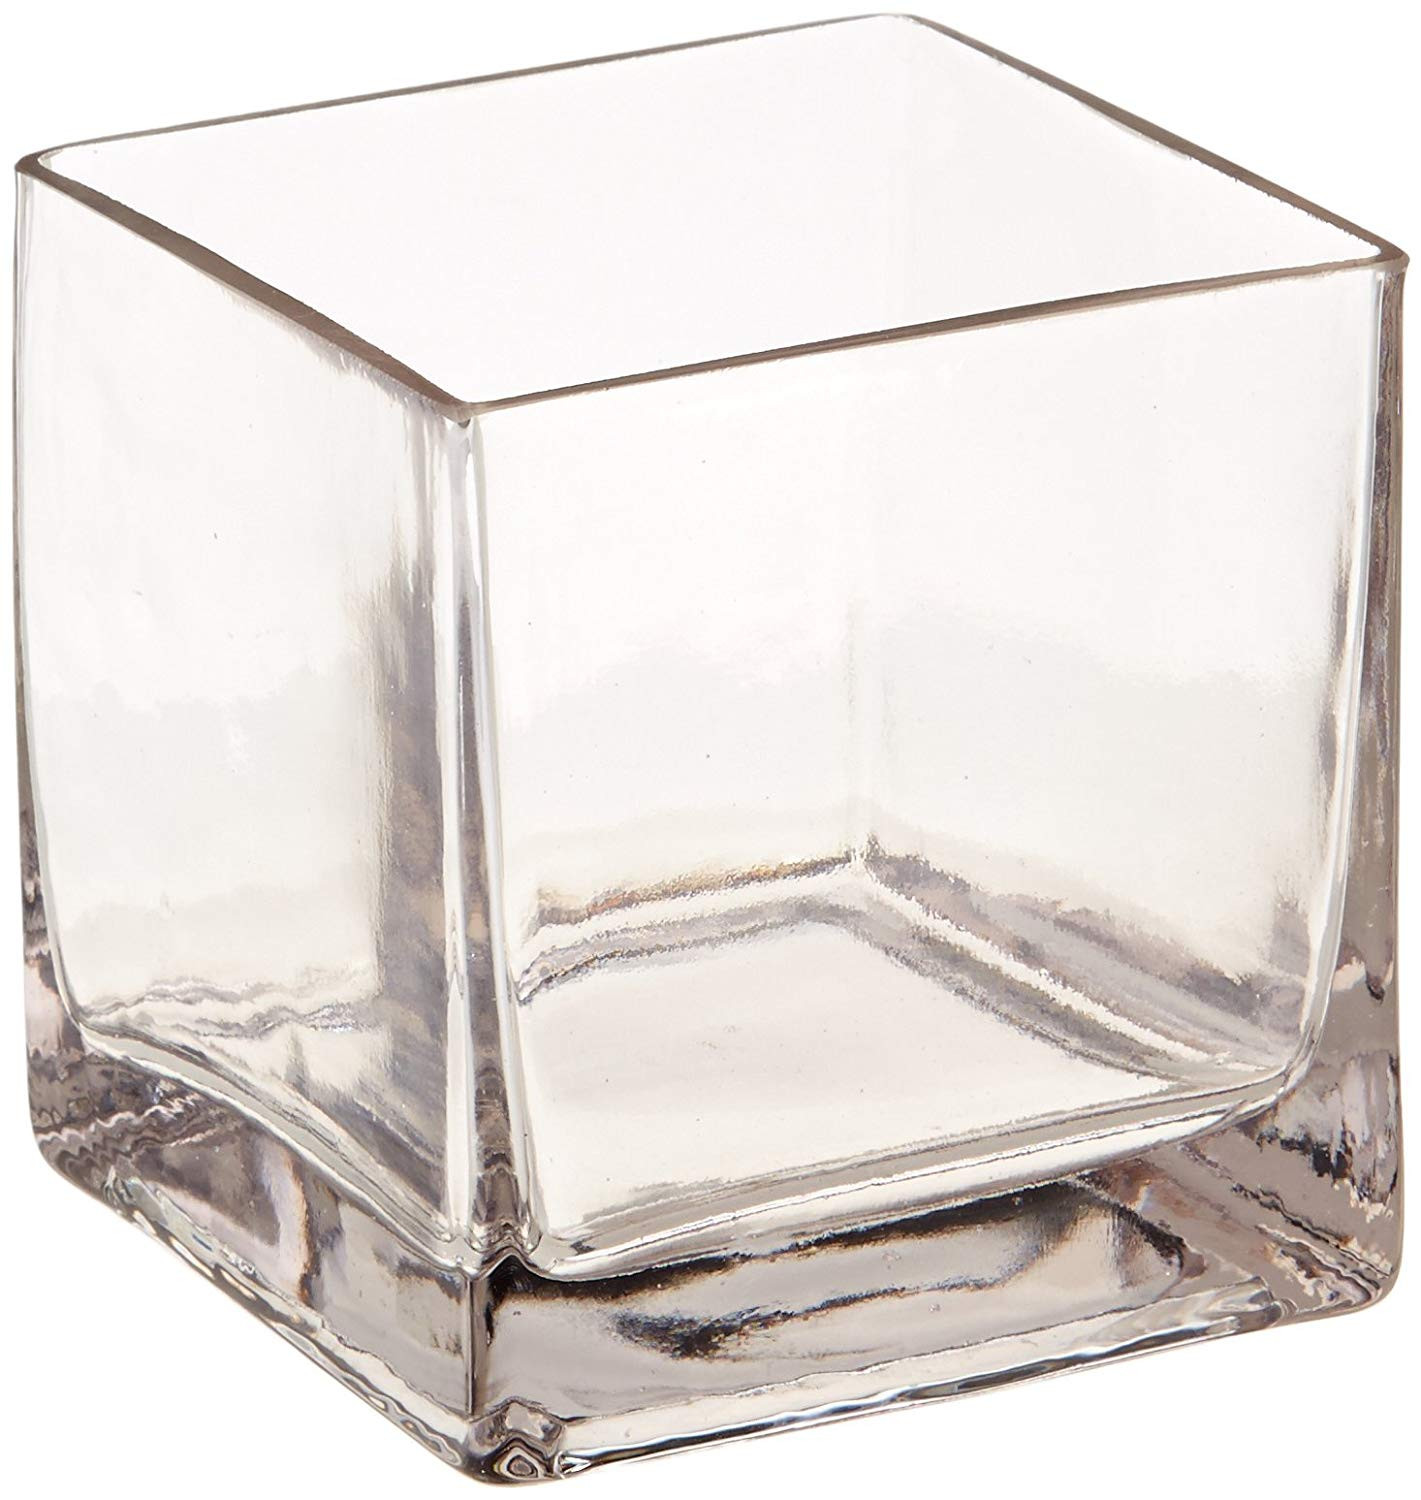 17 Ideal 6 X 12 Glass Cylinder Vase 2024 free download 6 x 12 glass cylinder vase of amazon com 12piece 4 square crystal clear glass vase home kitchen with 71 jezfmvnl sl1500